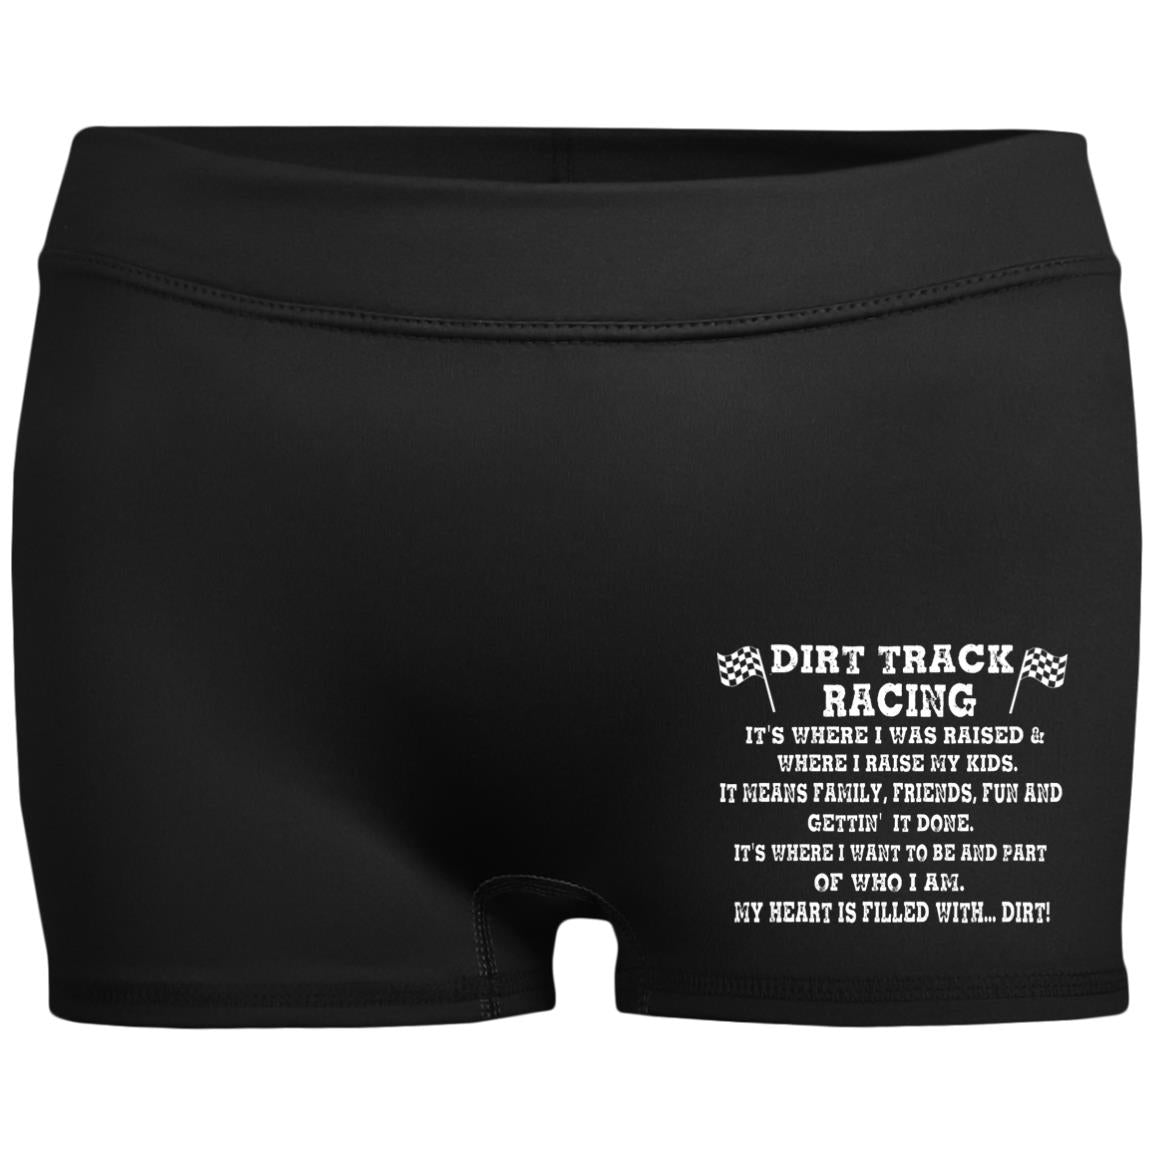 Dirt Track Racing It's Where I Was Raised Ladies' Fitted Moisture-Wicking 2.5 inch Inseam Shorts